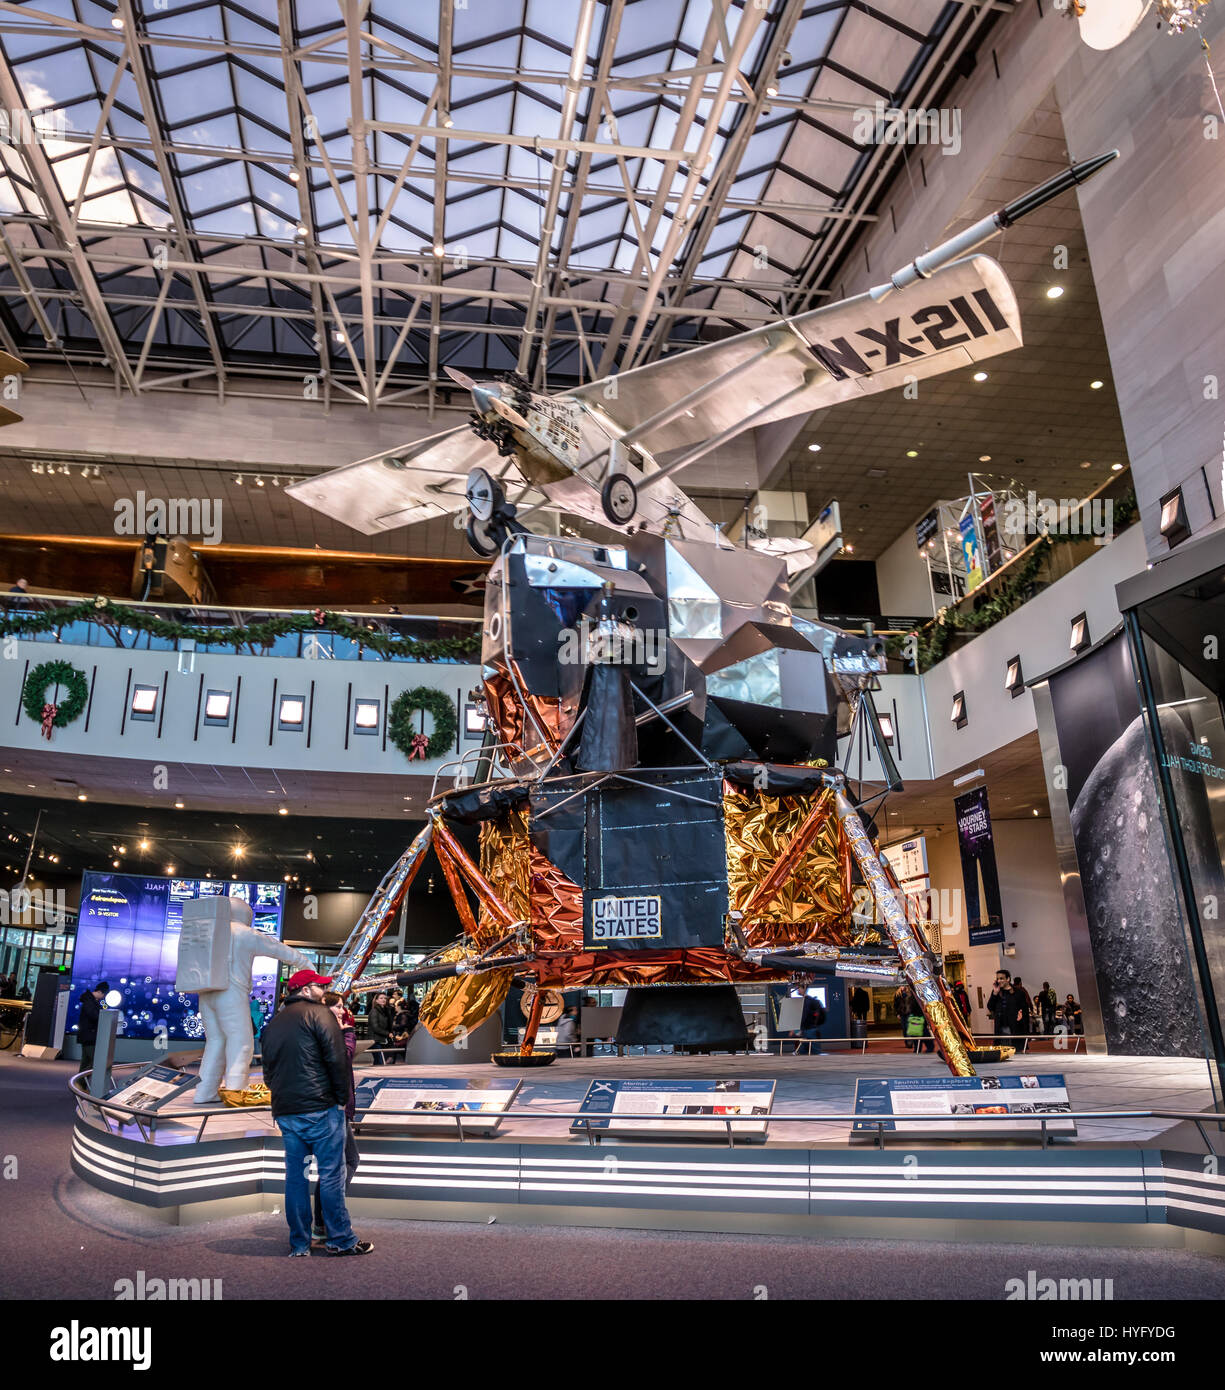 Innenraum des National Air and Space Museum der Smithsonian Institution, Washington, D.C., USA Stockfoto